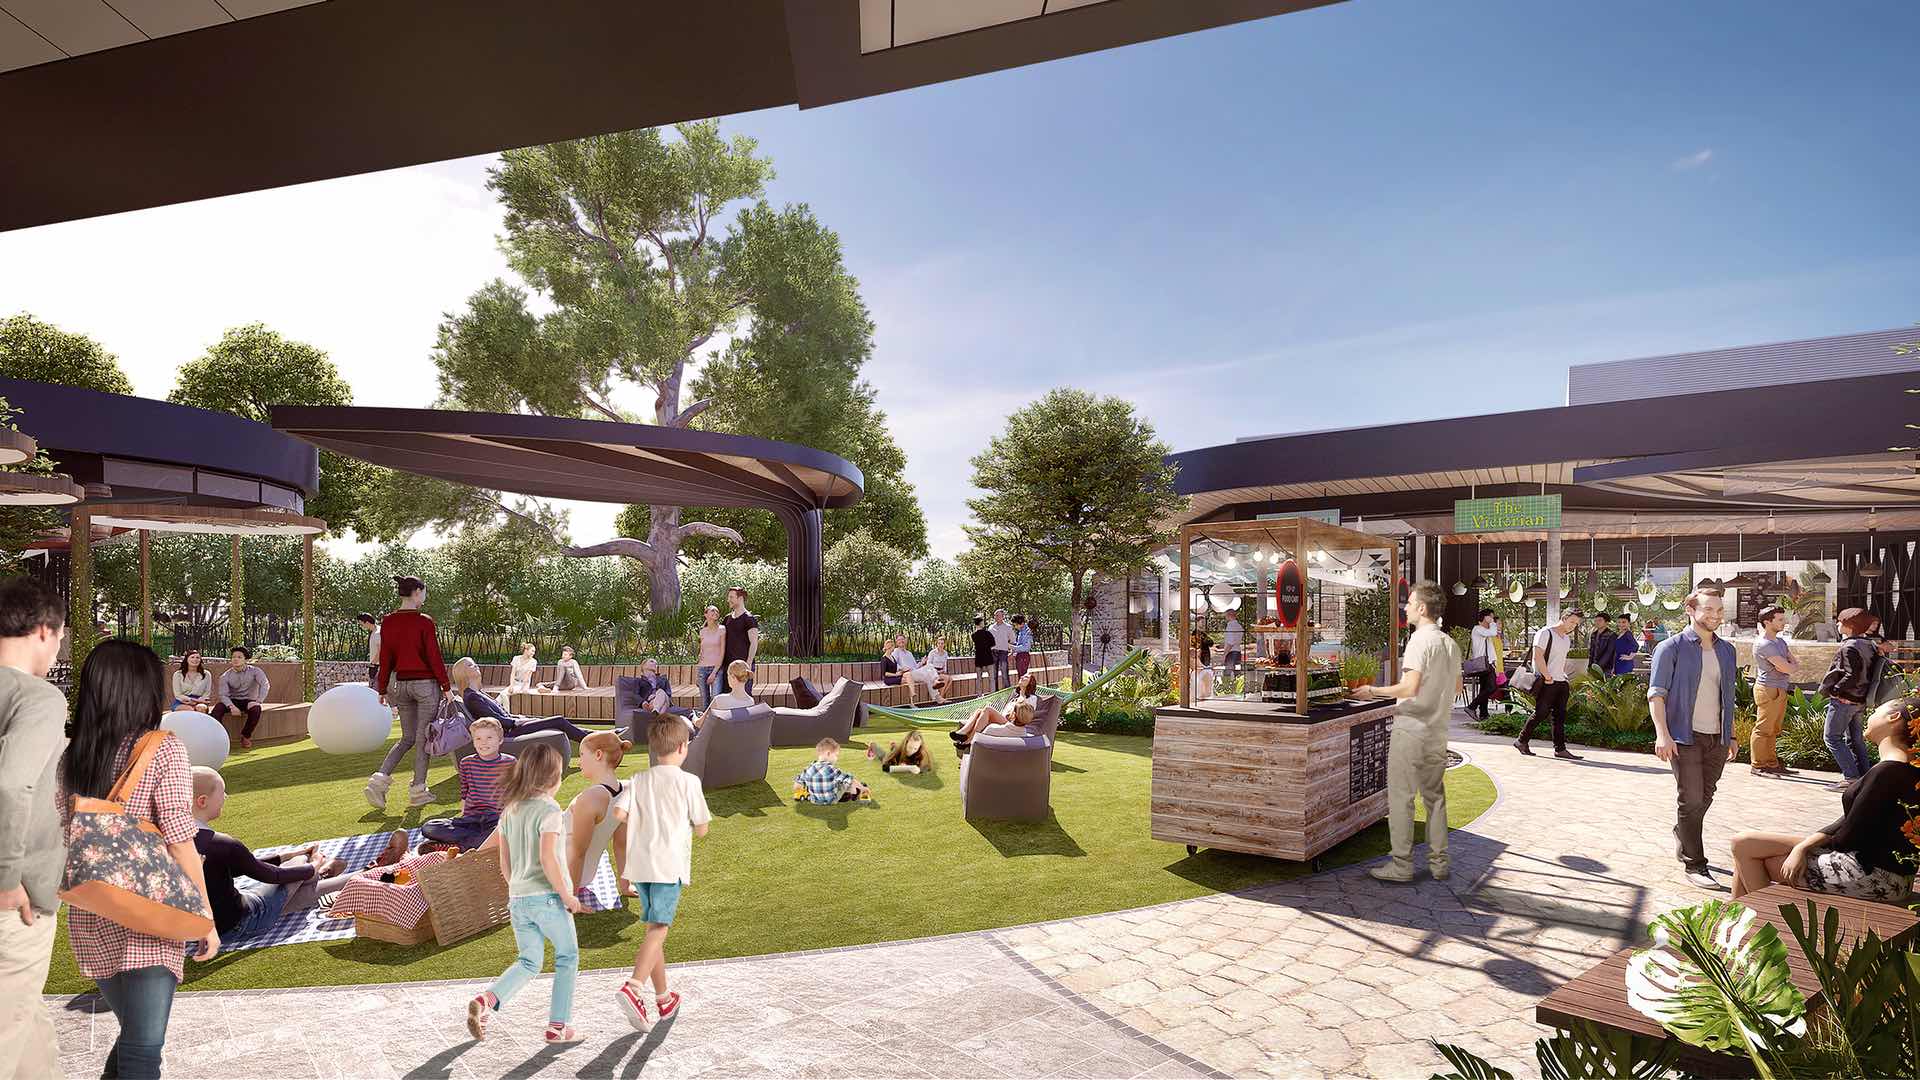 A New Food And Entertainment Precinct Is Coming to Melbourne's Northern Suburbs